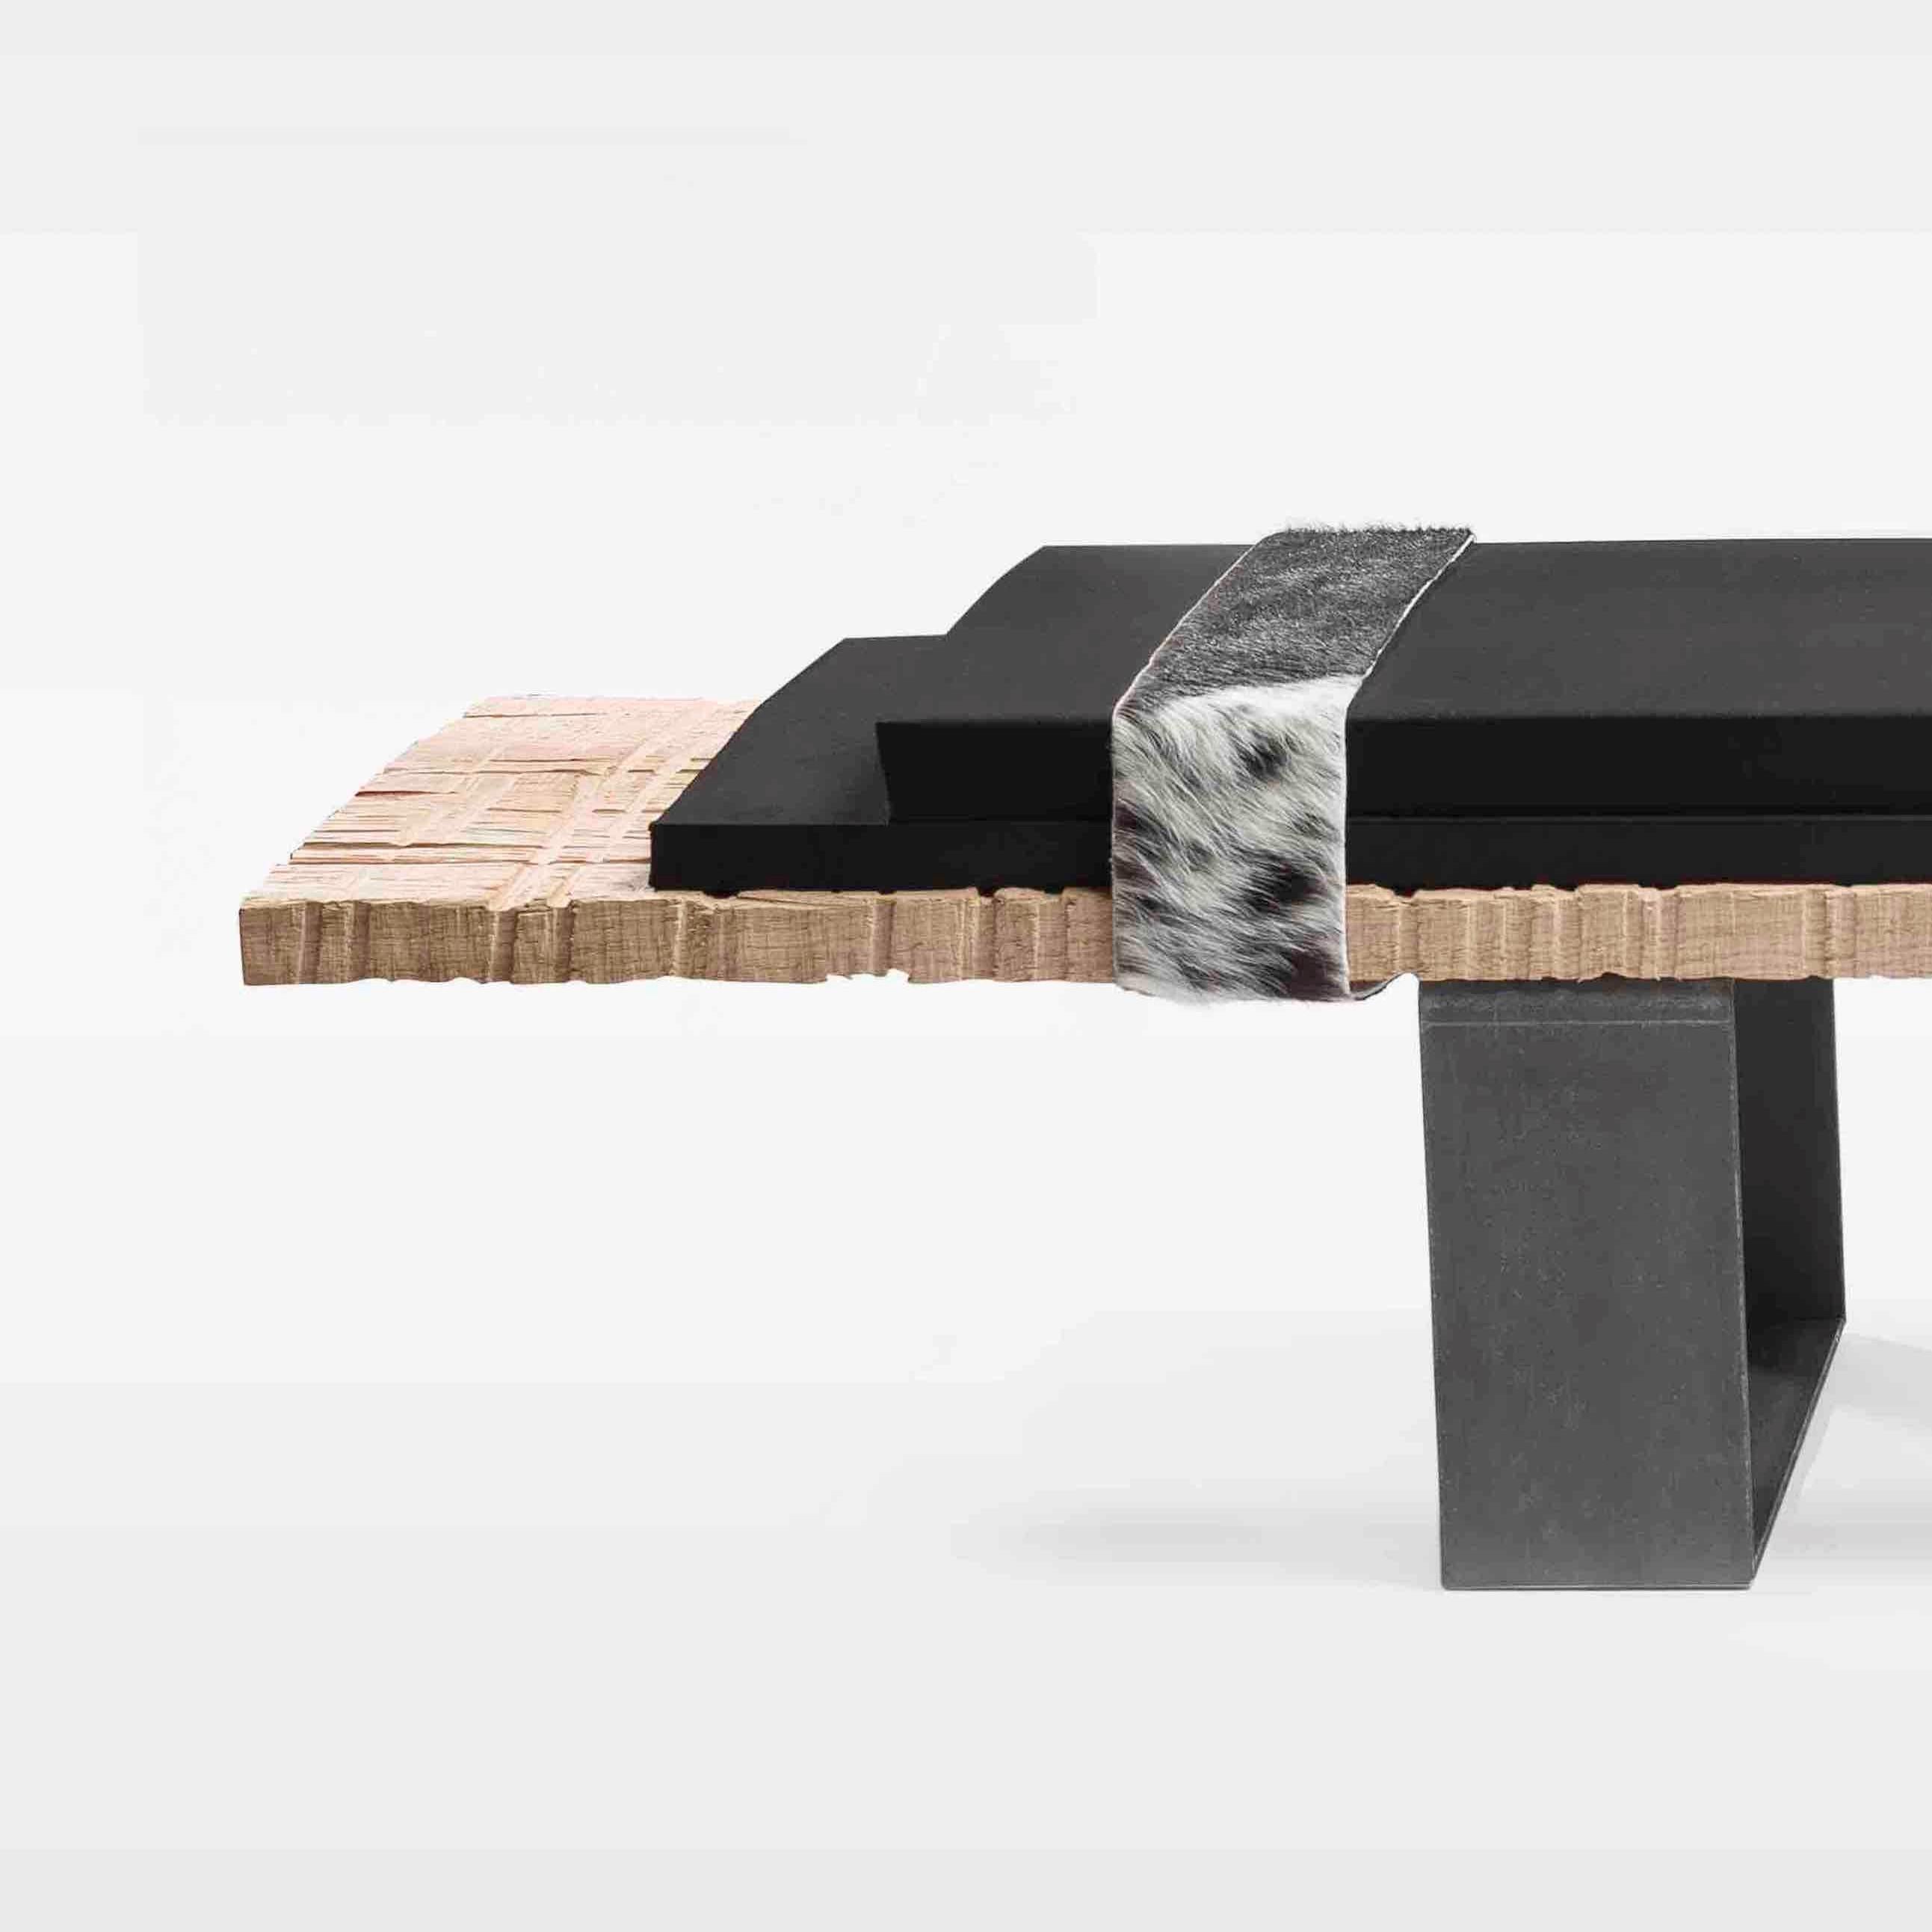 Numero 7 bench by Isola Design
Dimensions: W 200 x D 38 x H 34 cm
Materials: Carved raw oak, EPDM foam leather, Skin, feet in oiled raw steel.
Options: burnt wood, brass foot (not included in price).

You can choose your own